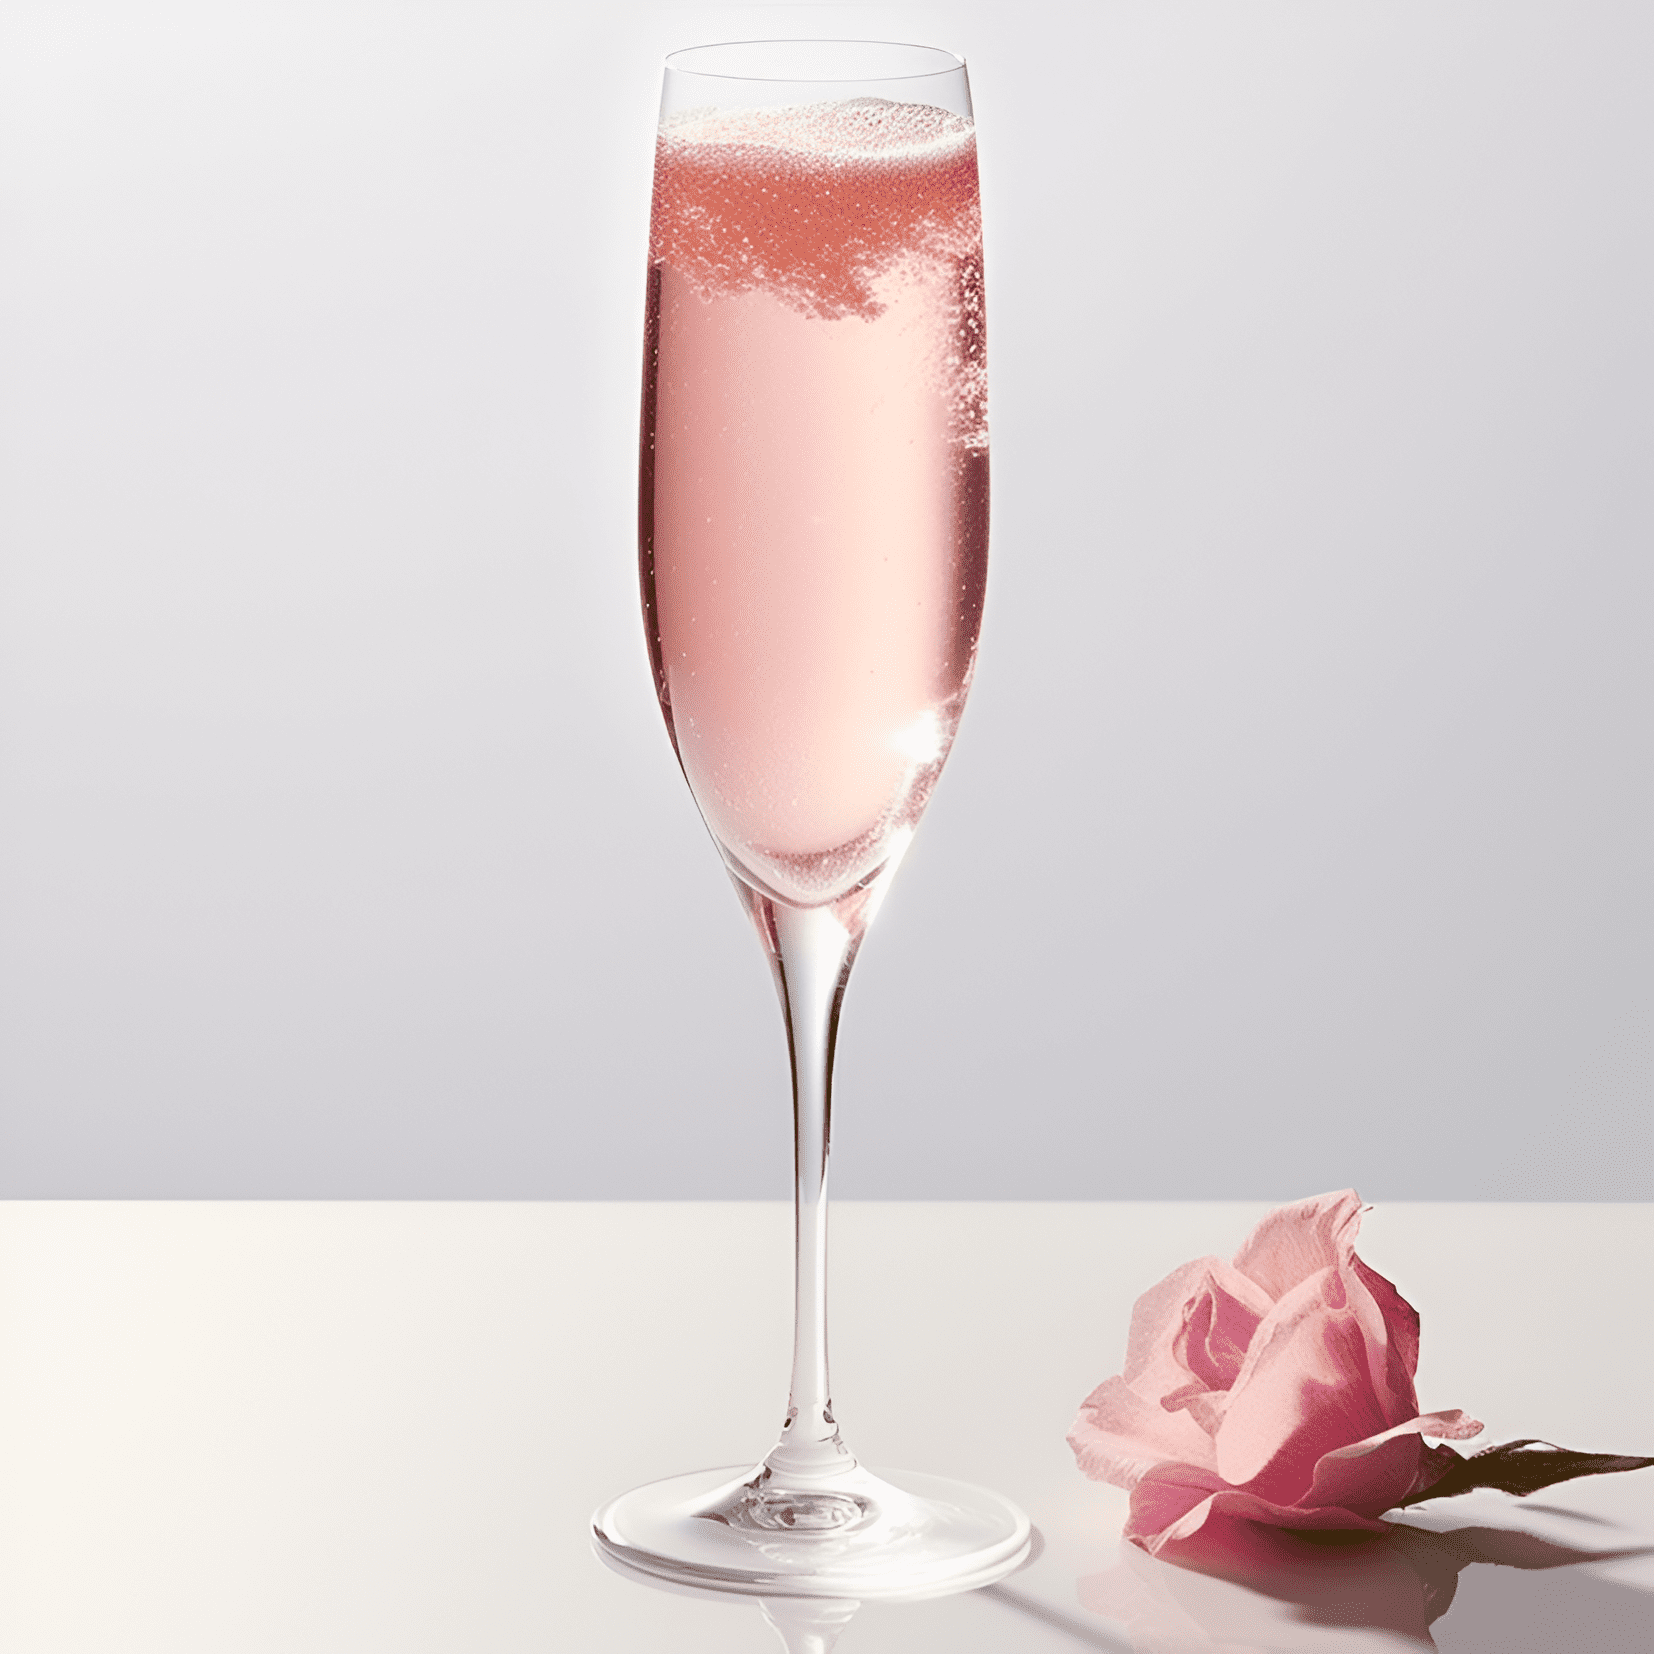 Rose Tattoo Cocktail Recipe - The Rose Tattoo cocktail is a harmonious blend of sweet, floral, and slightly tart flavors. The combination of gin, rose syrup, lemon juice, and champagne creates a delicate and sophisticated taste, with a hint of effervescence from the champagne.